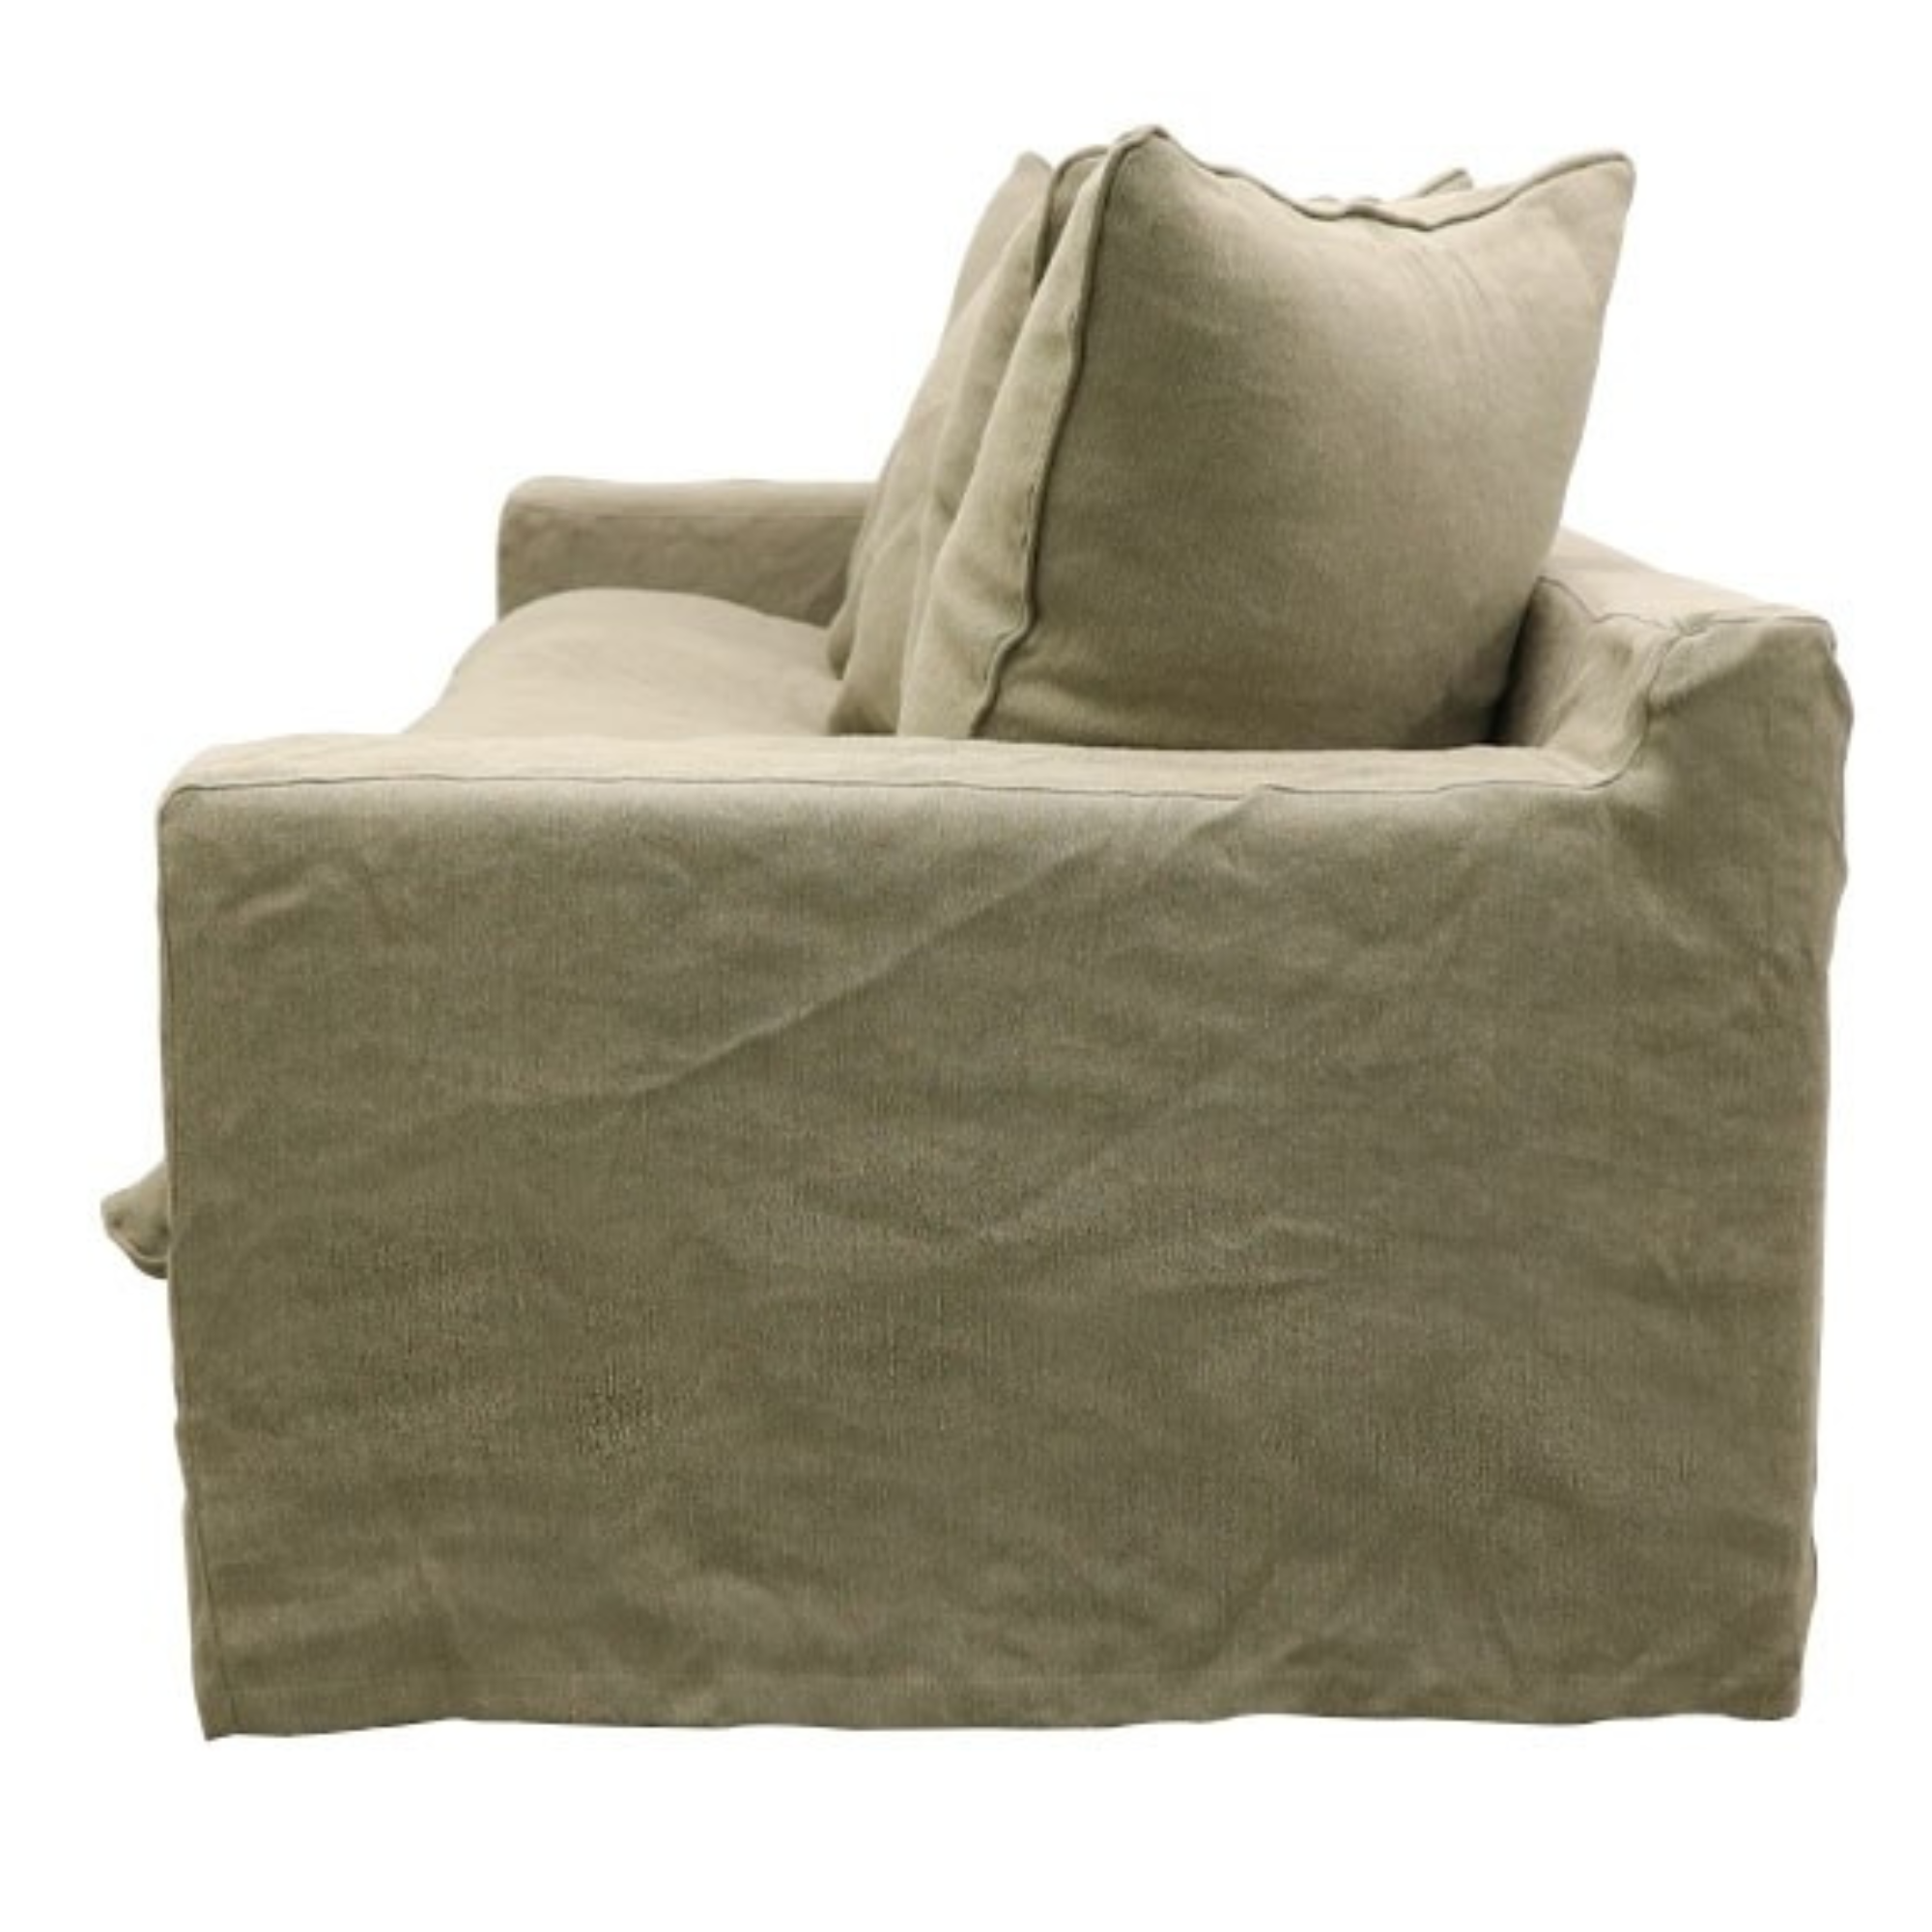 KEELY SLIPCOVER 3 SEATER SOFA | 5 COLOURS